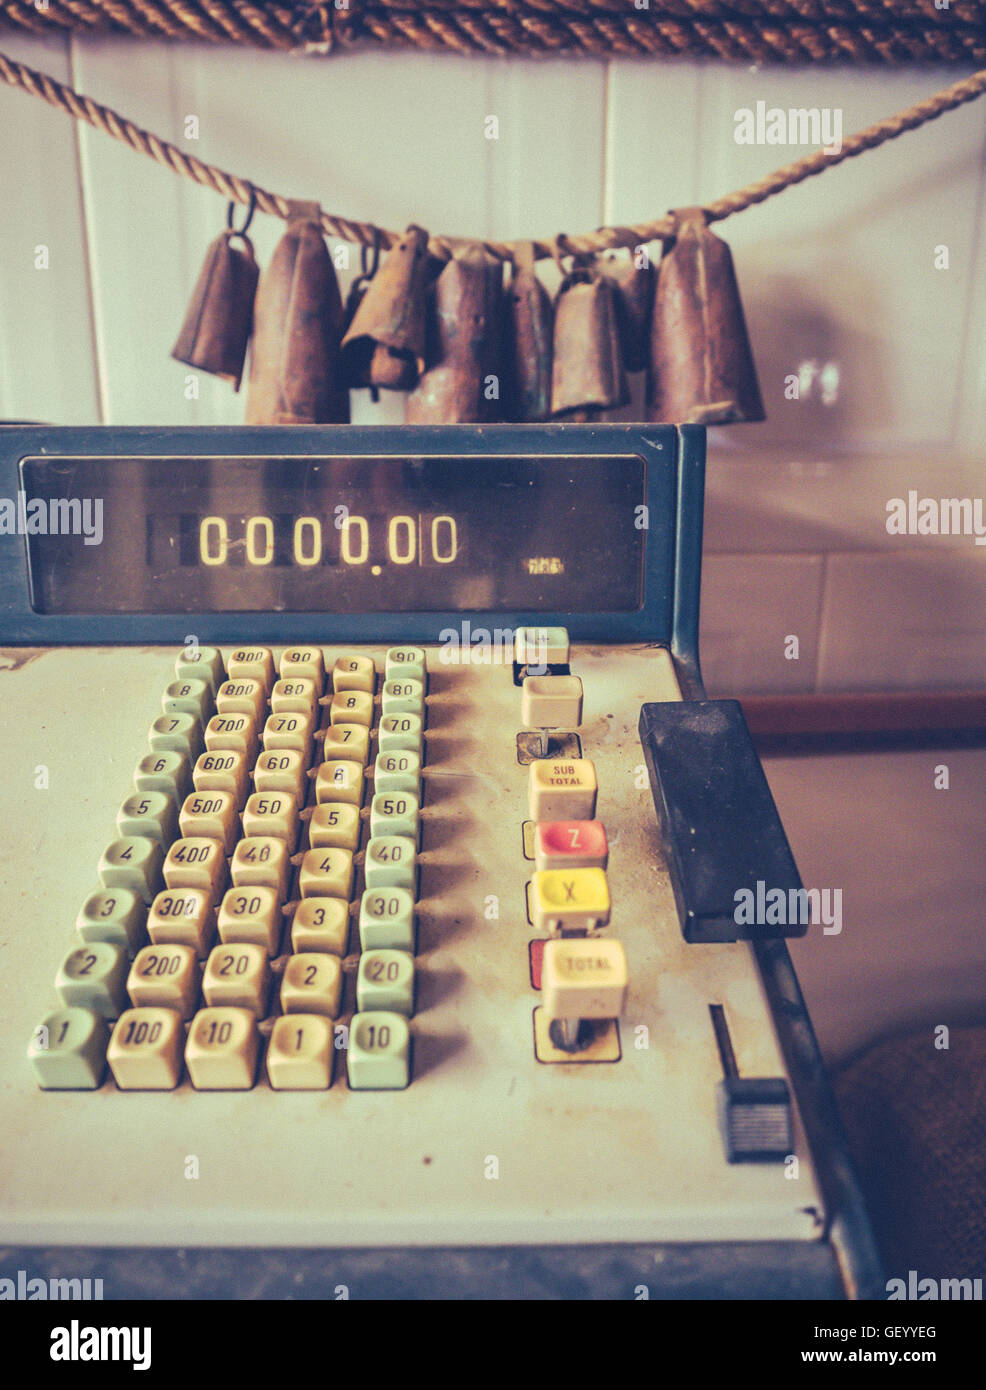 Details of an dirty old rusty vintage cash register Stock Photo